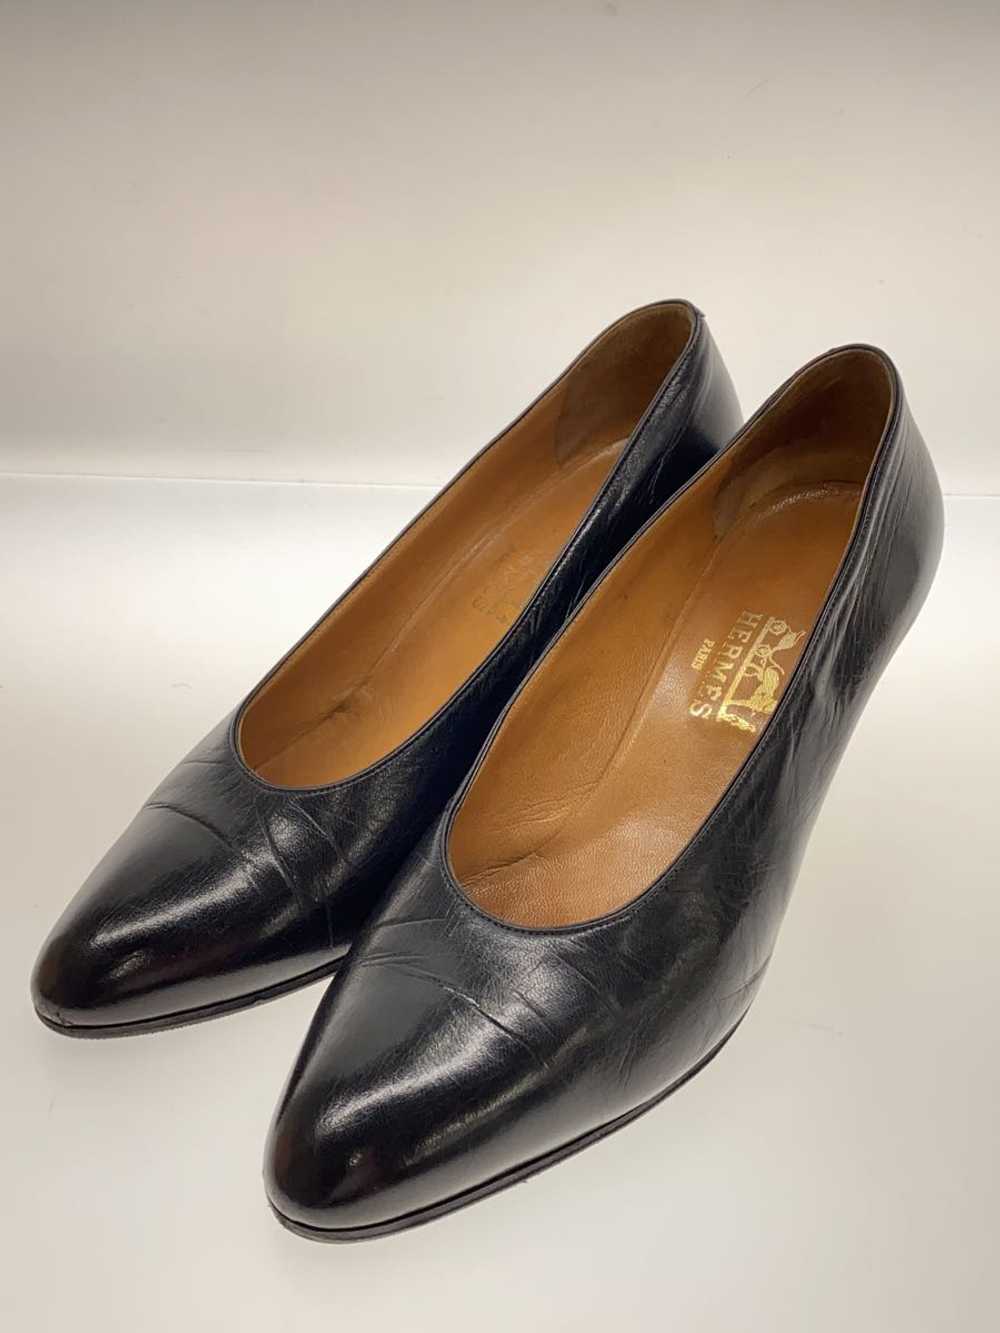 Hermes Pumps/36.5/Black/Scratches/Scratches On To… - image 2